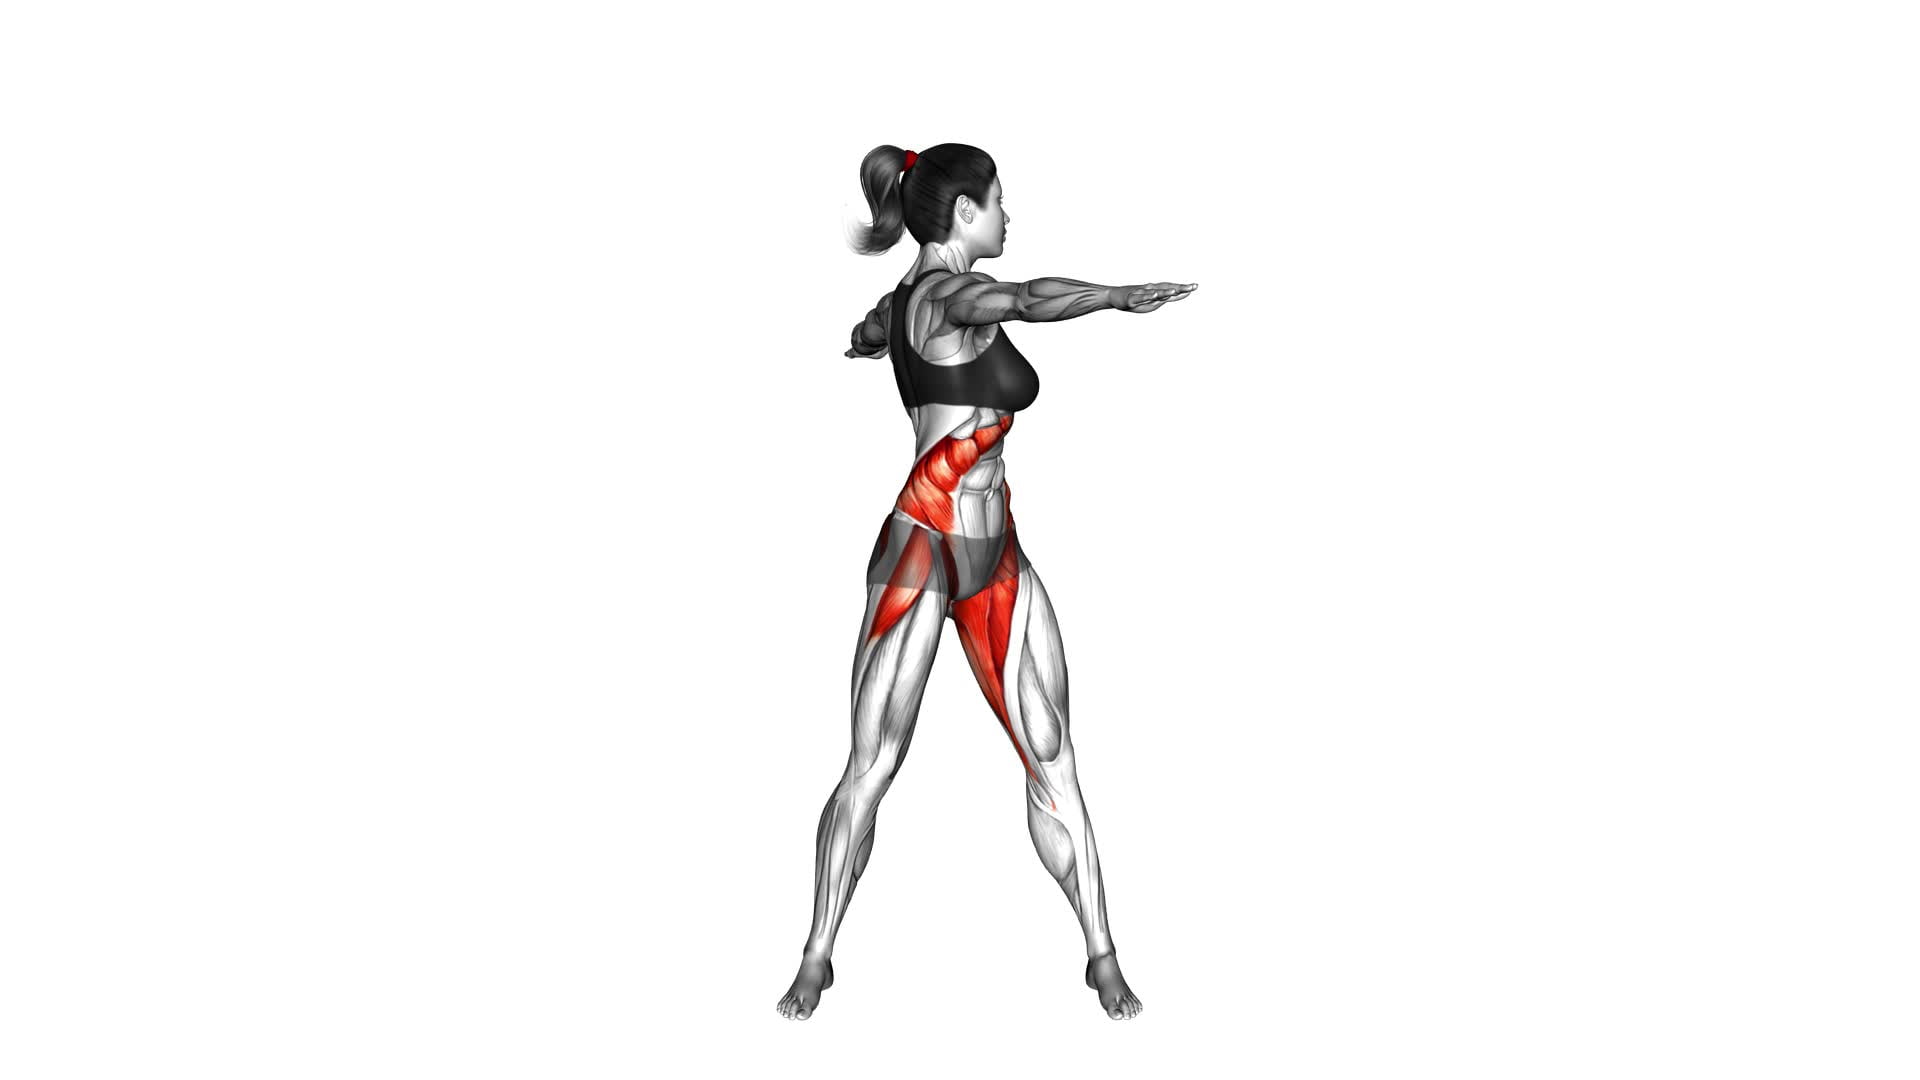 Standing Torso Twist (female) - Video Exercise Guide & Tips